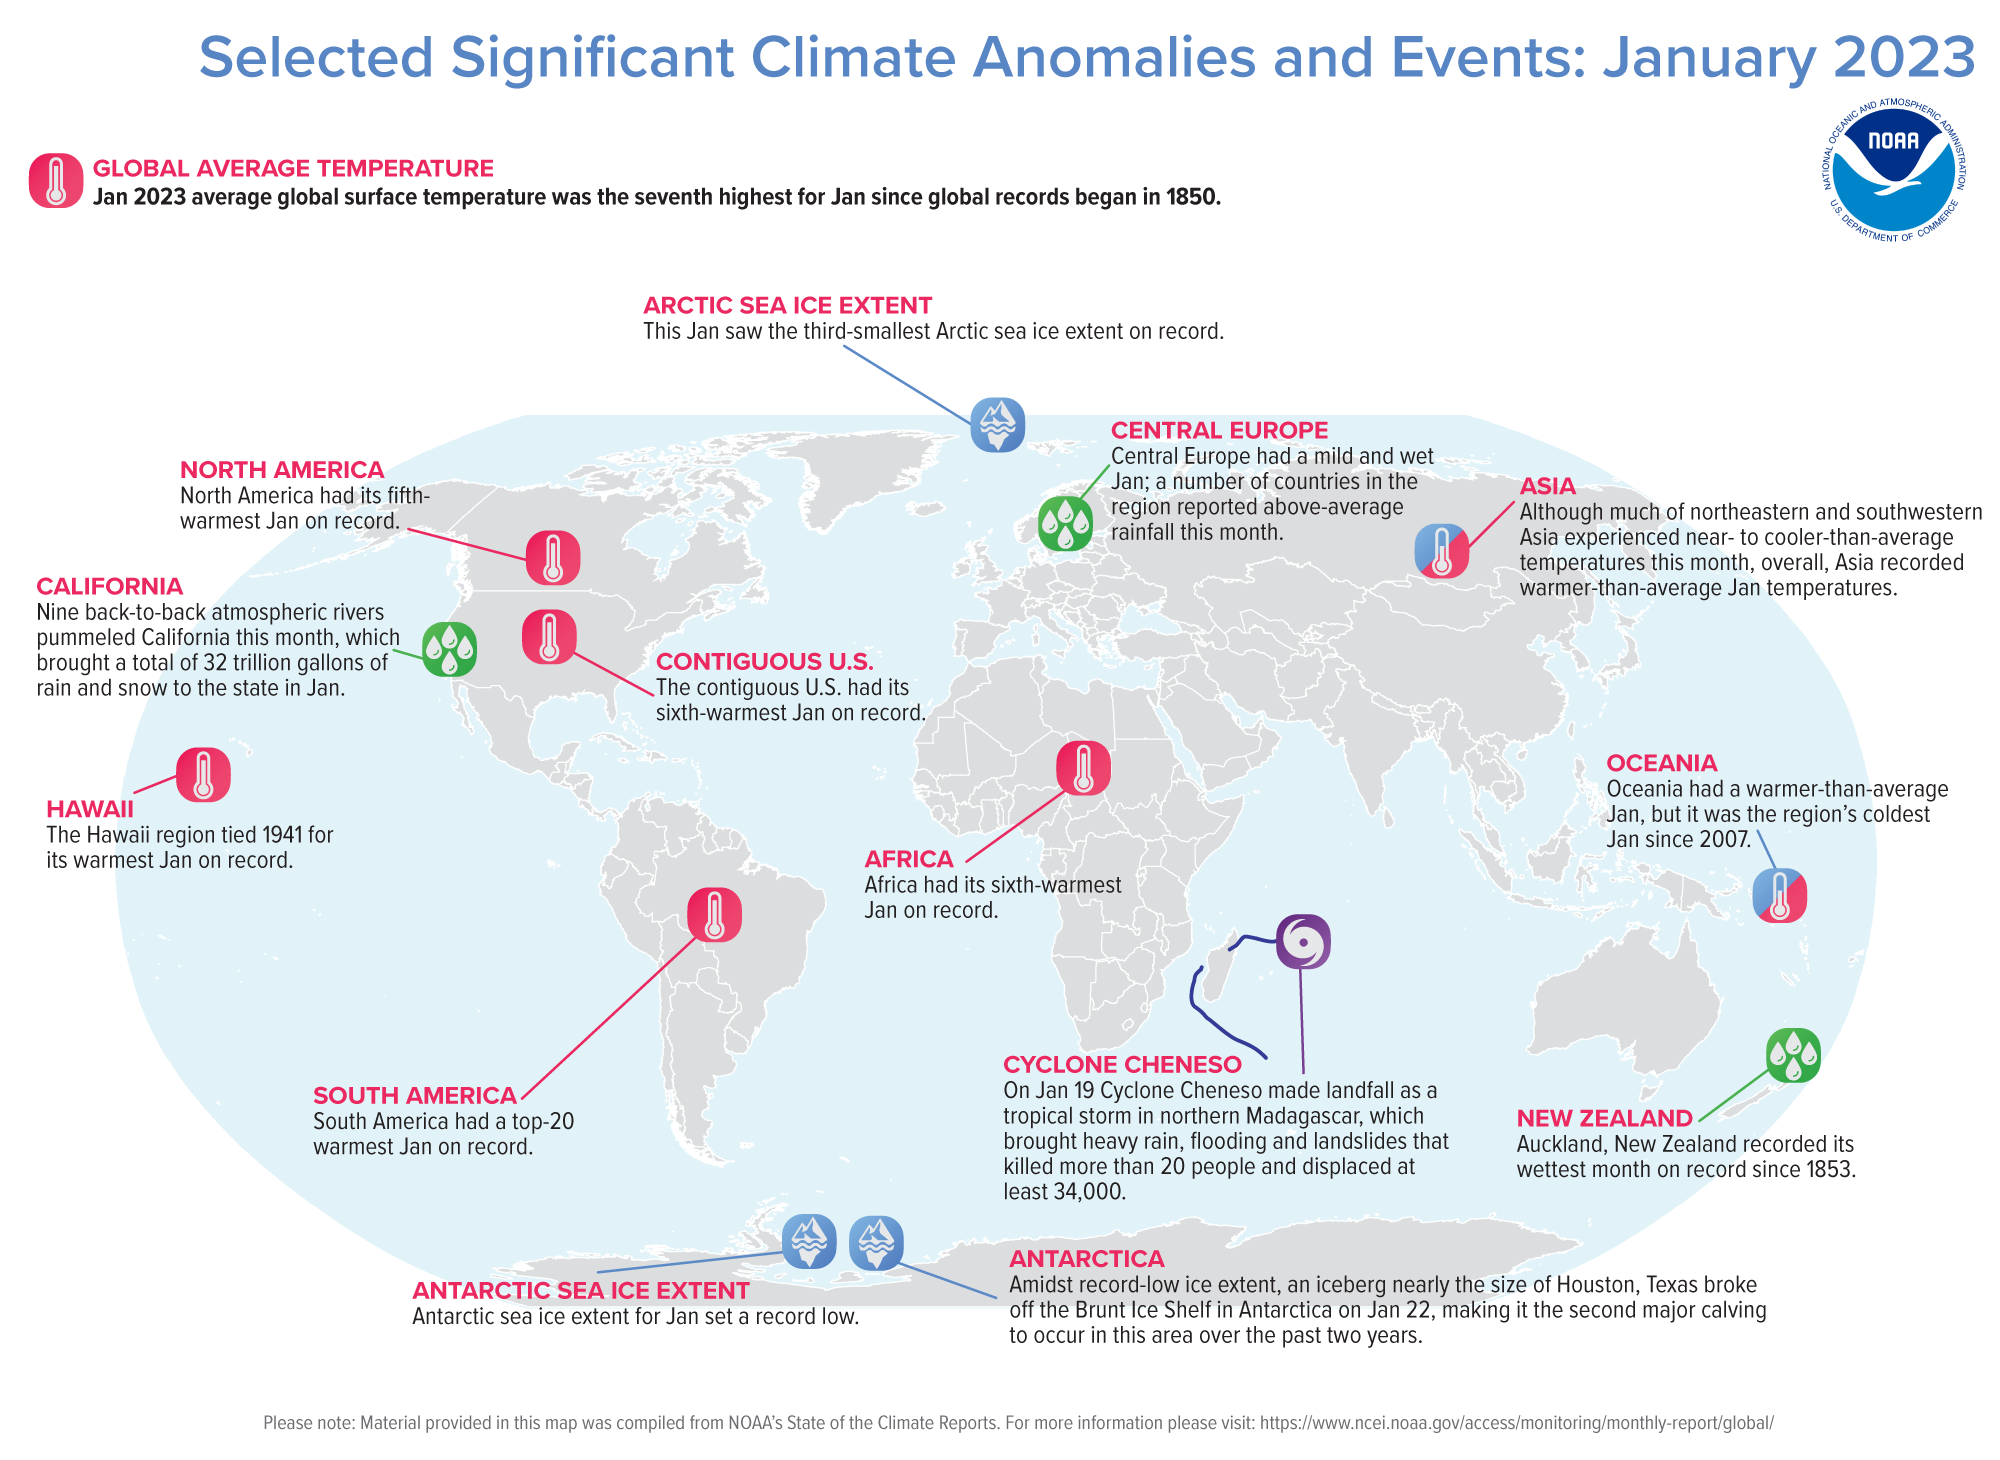 January 2023 Selected Climate Anomalies and Events Map